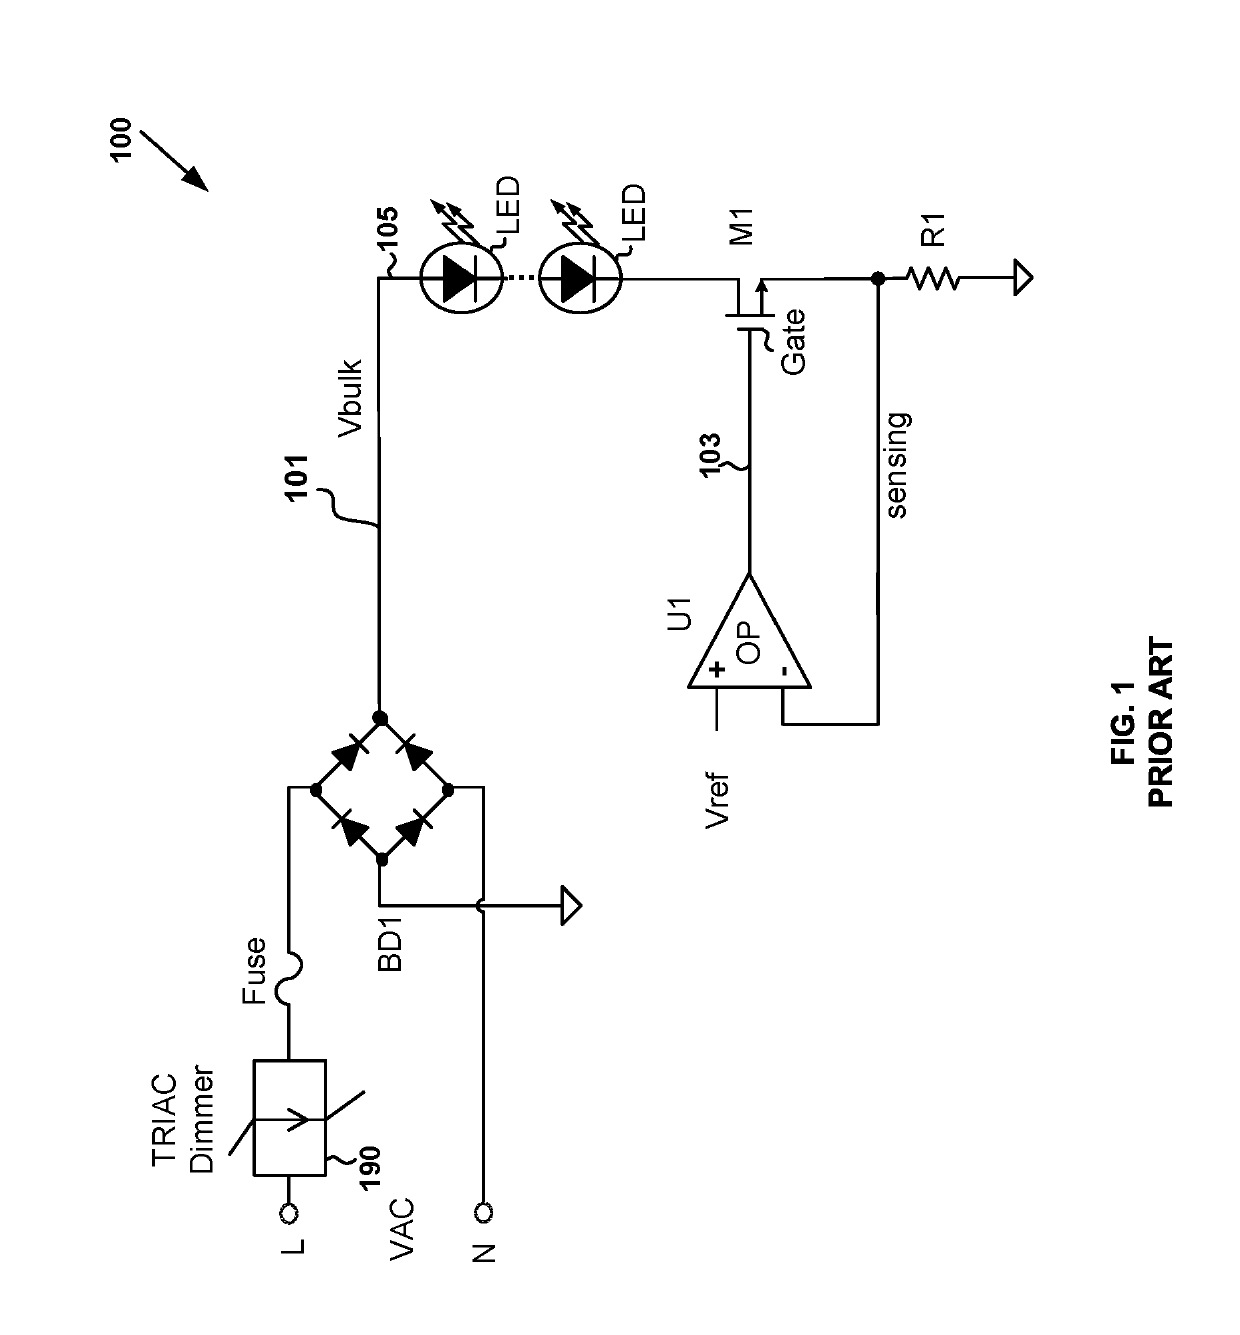 LED lighting systems with triac dimmers and methods thereof